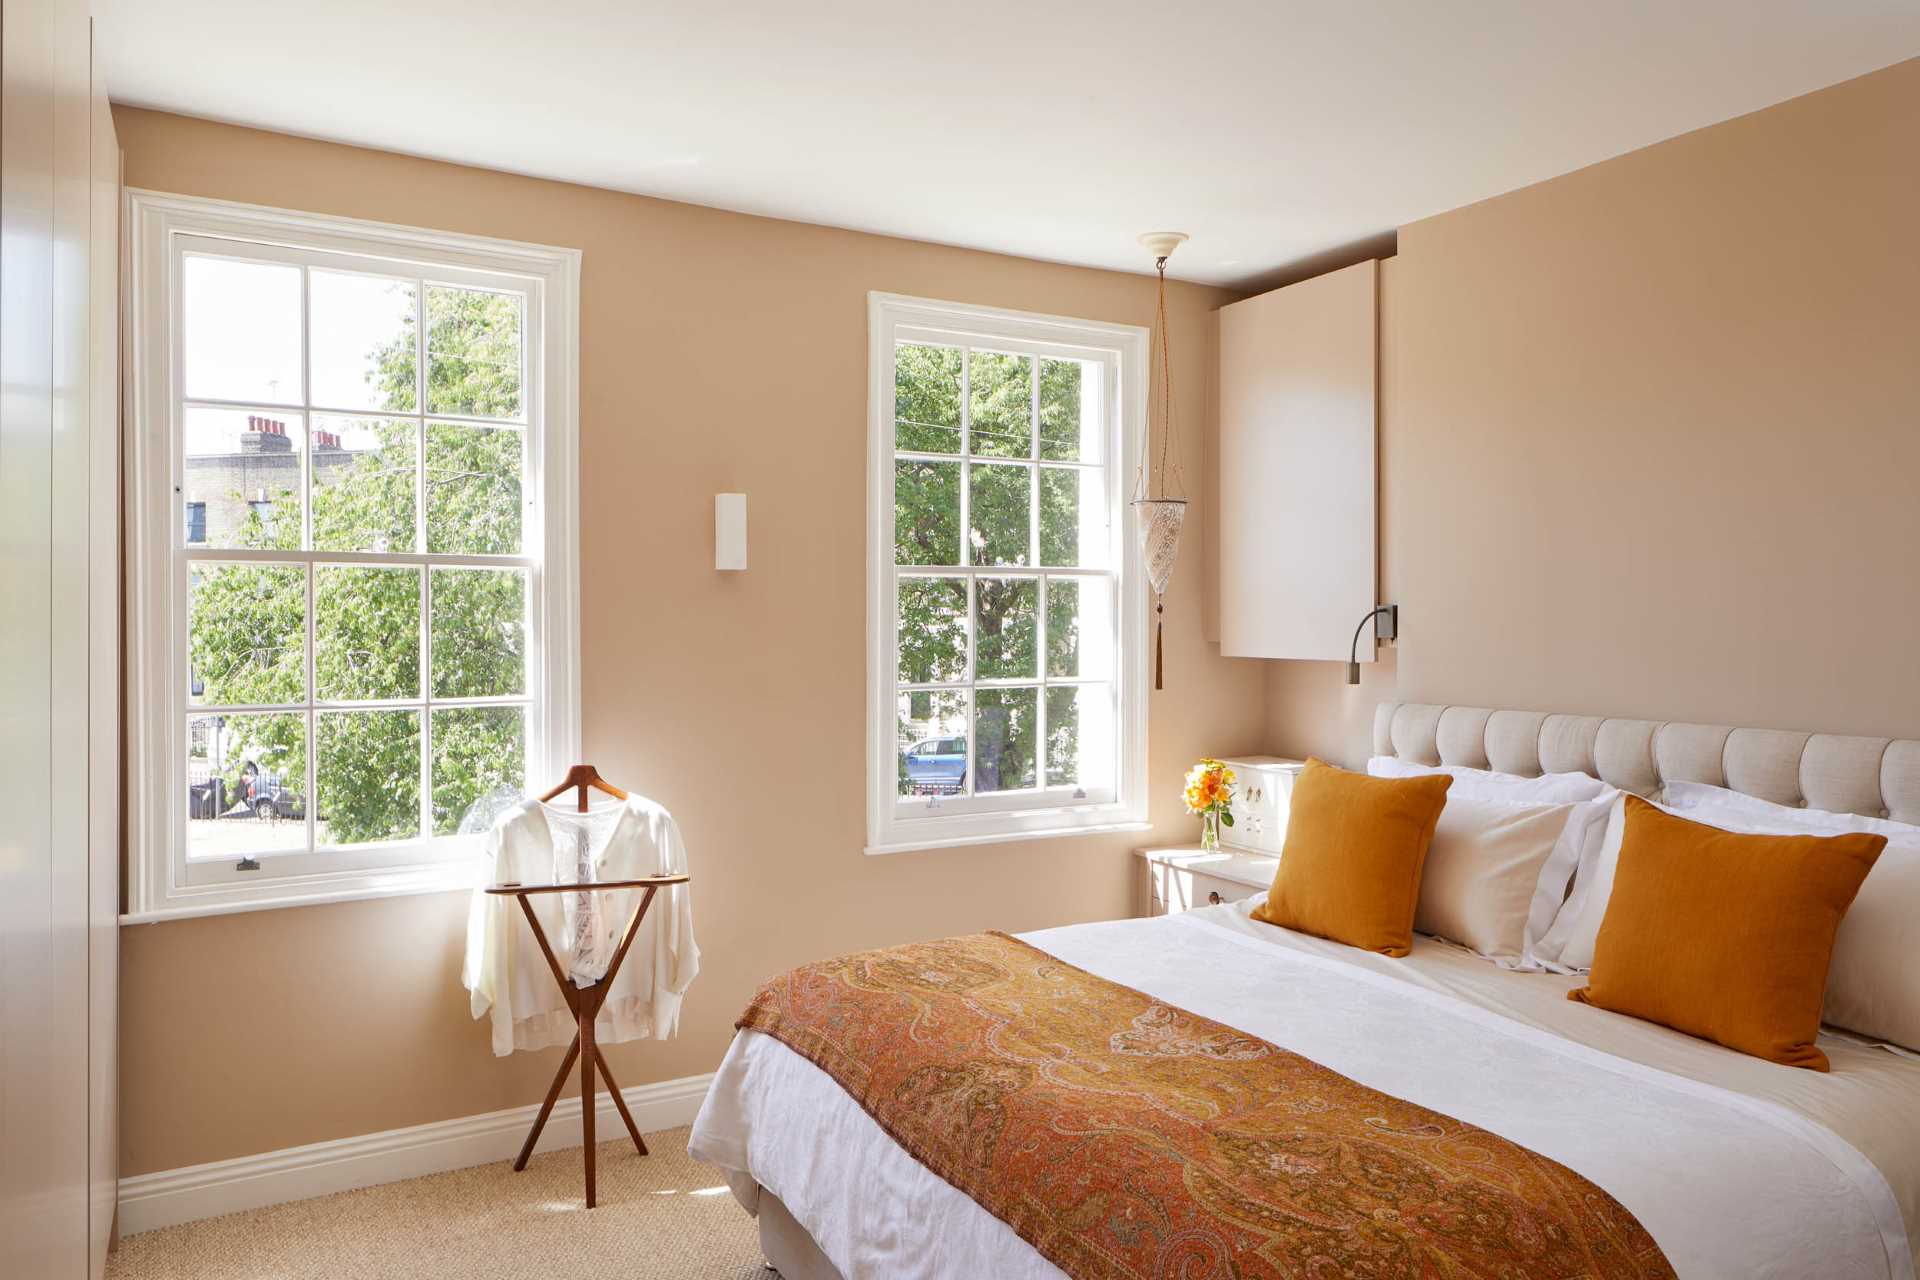 In this bedroom, a pair of 6-pane sash windows provide a view of the trees and street.